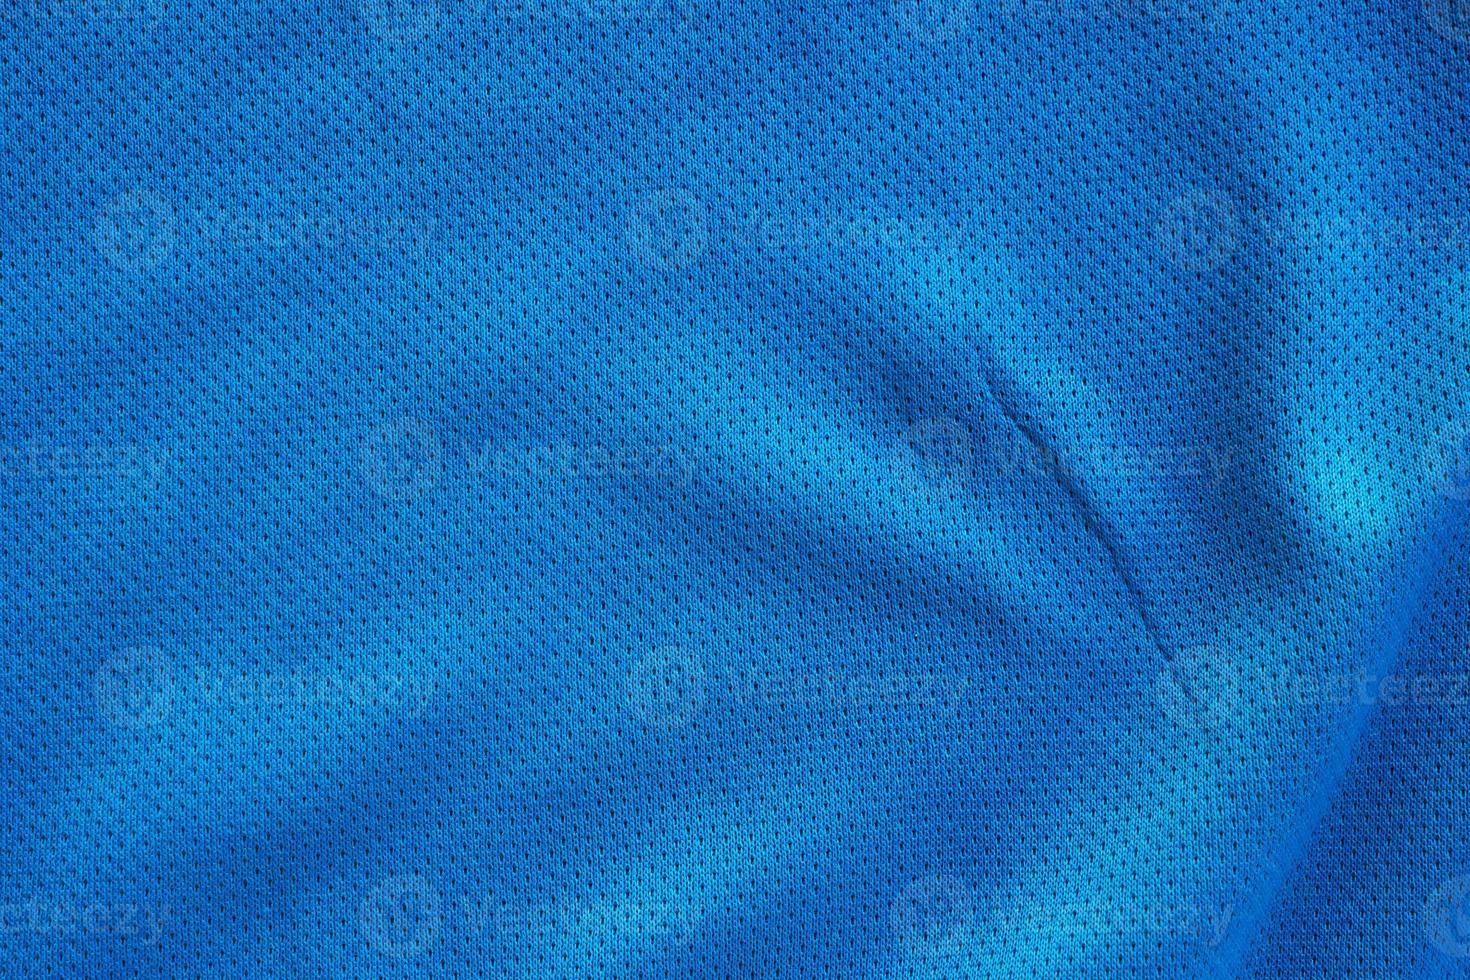 Blue fabric sport clothing football jersey with air mesh texture background photo